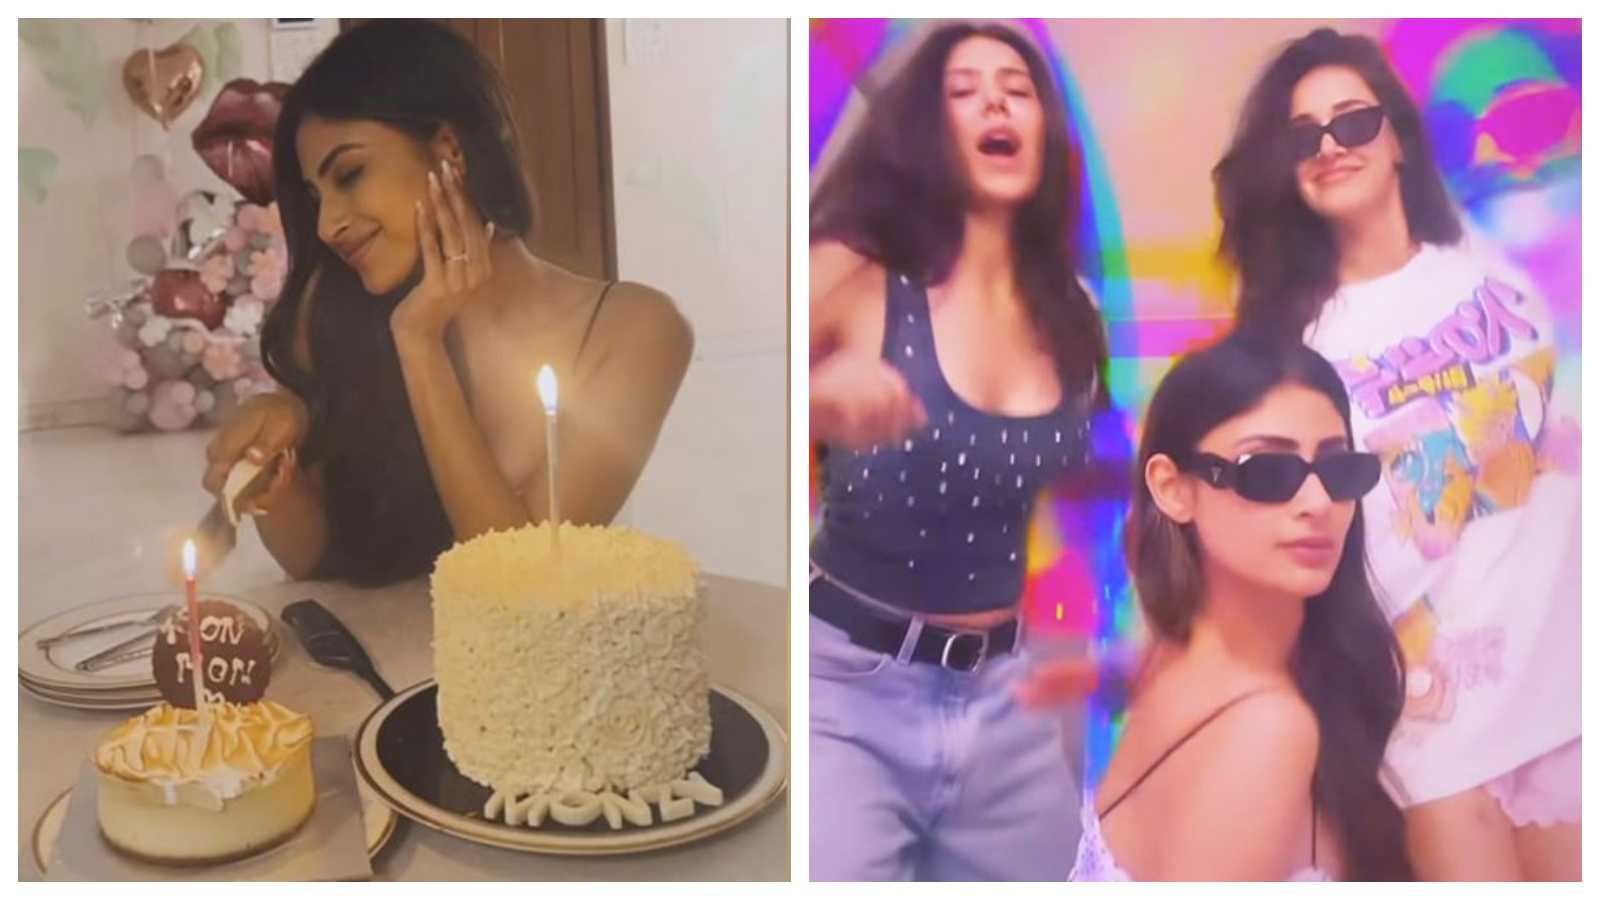 'Meet the loons': Mouni Roy grooves with Disha Patani and Sonam Bajwa on her pre-birthday bash